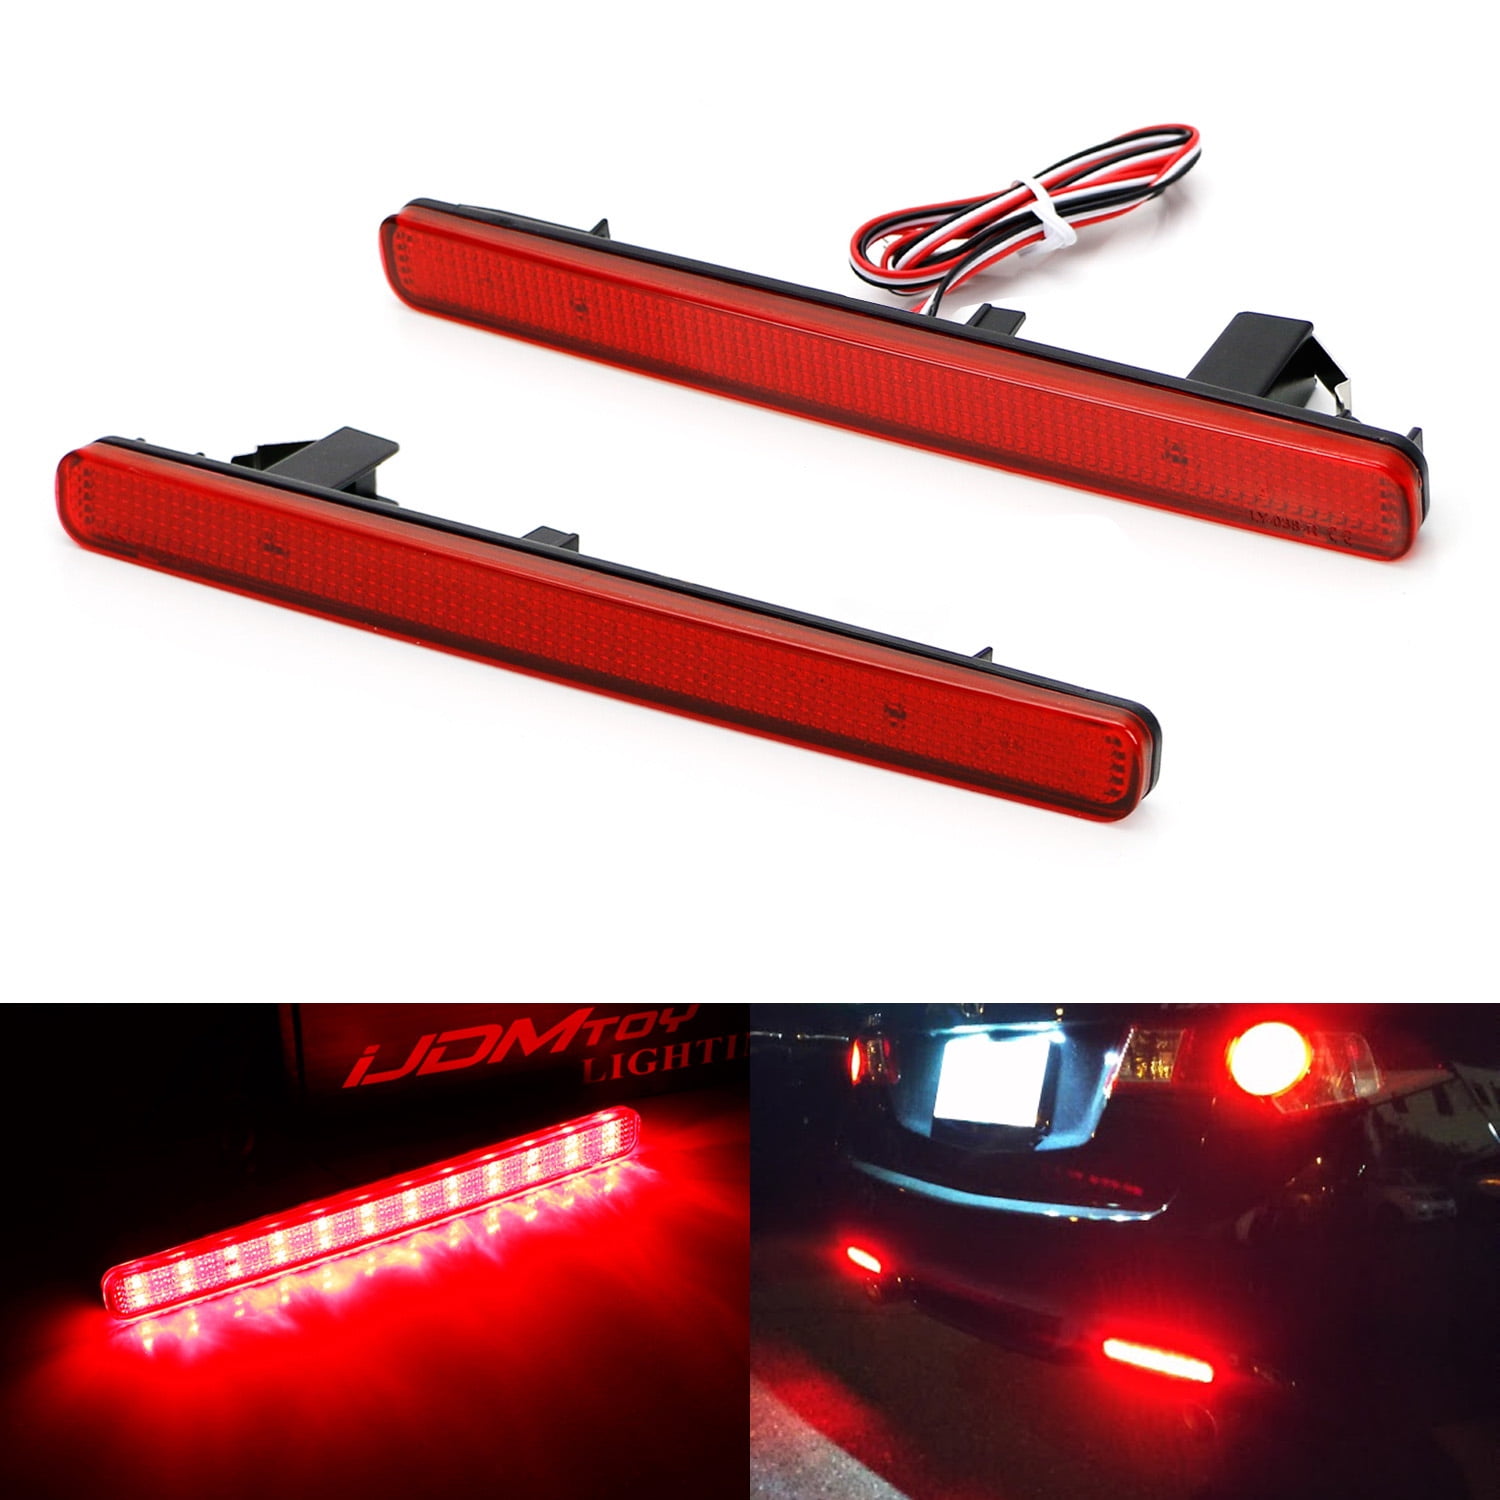 KENRTIR Red Lens 48-SMD LED Bumper Reflector Lights Compatible with 2009 2010 2011 2012 2013 2014 Acura TSX Brake & Rear Fog Lamps Function as Tail Euro Accord 